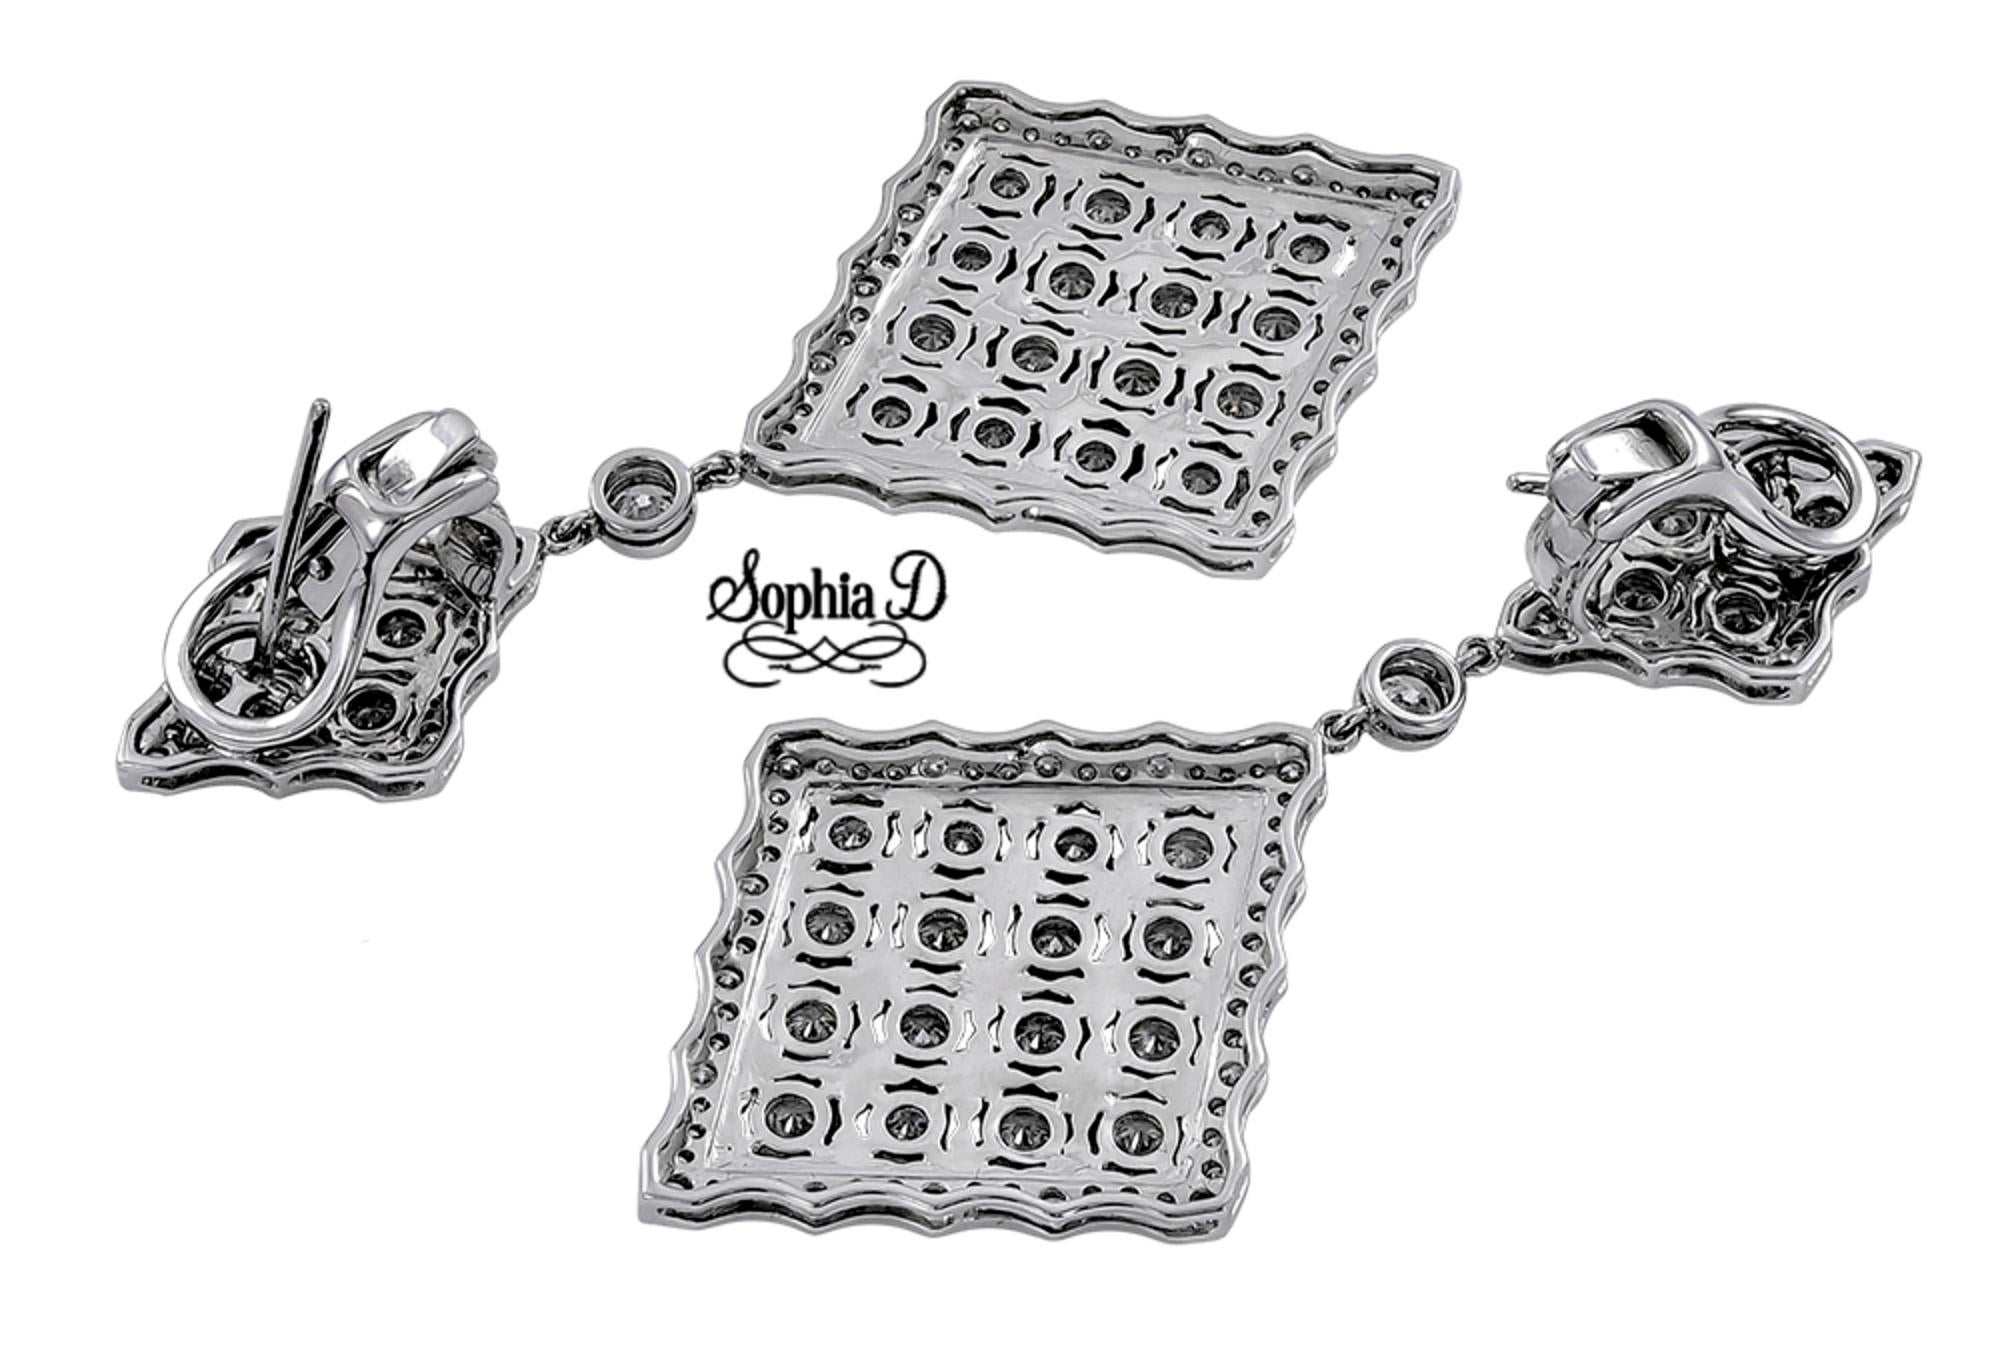 Sophia D's gorgeous platinum diamond shape earrings set in platinum with round cut diamonds weighing a total of 7.57 carats.

Sophia D by Joseph Dardashti LTD has been known worldwide for 35 years and are inspired by classic Art Deco design that